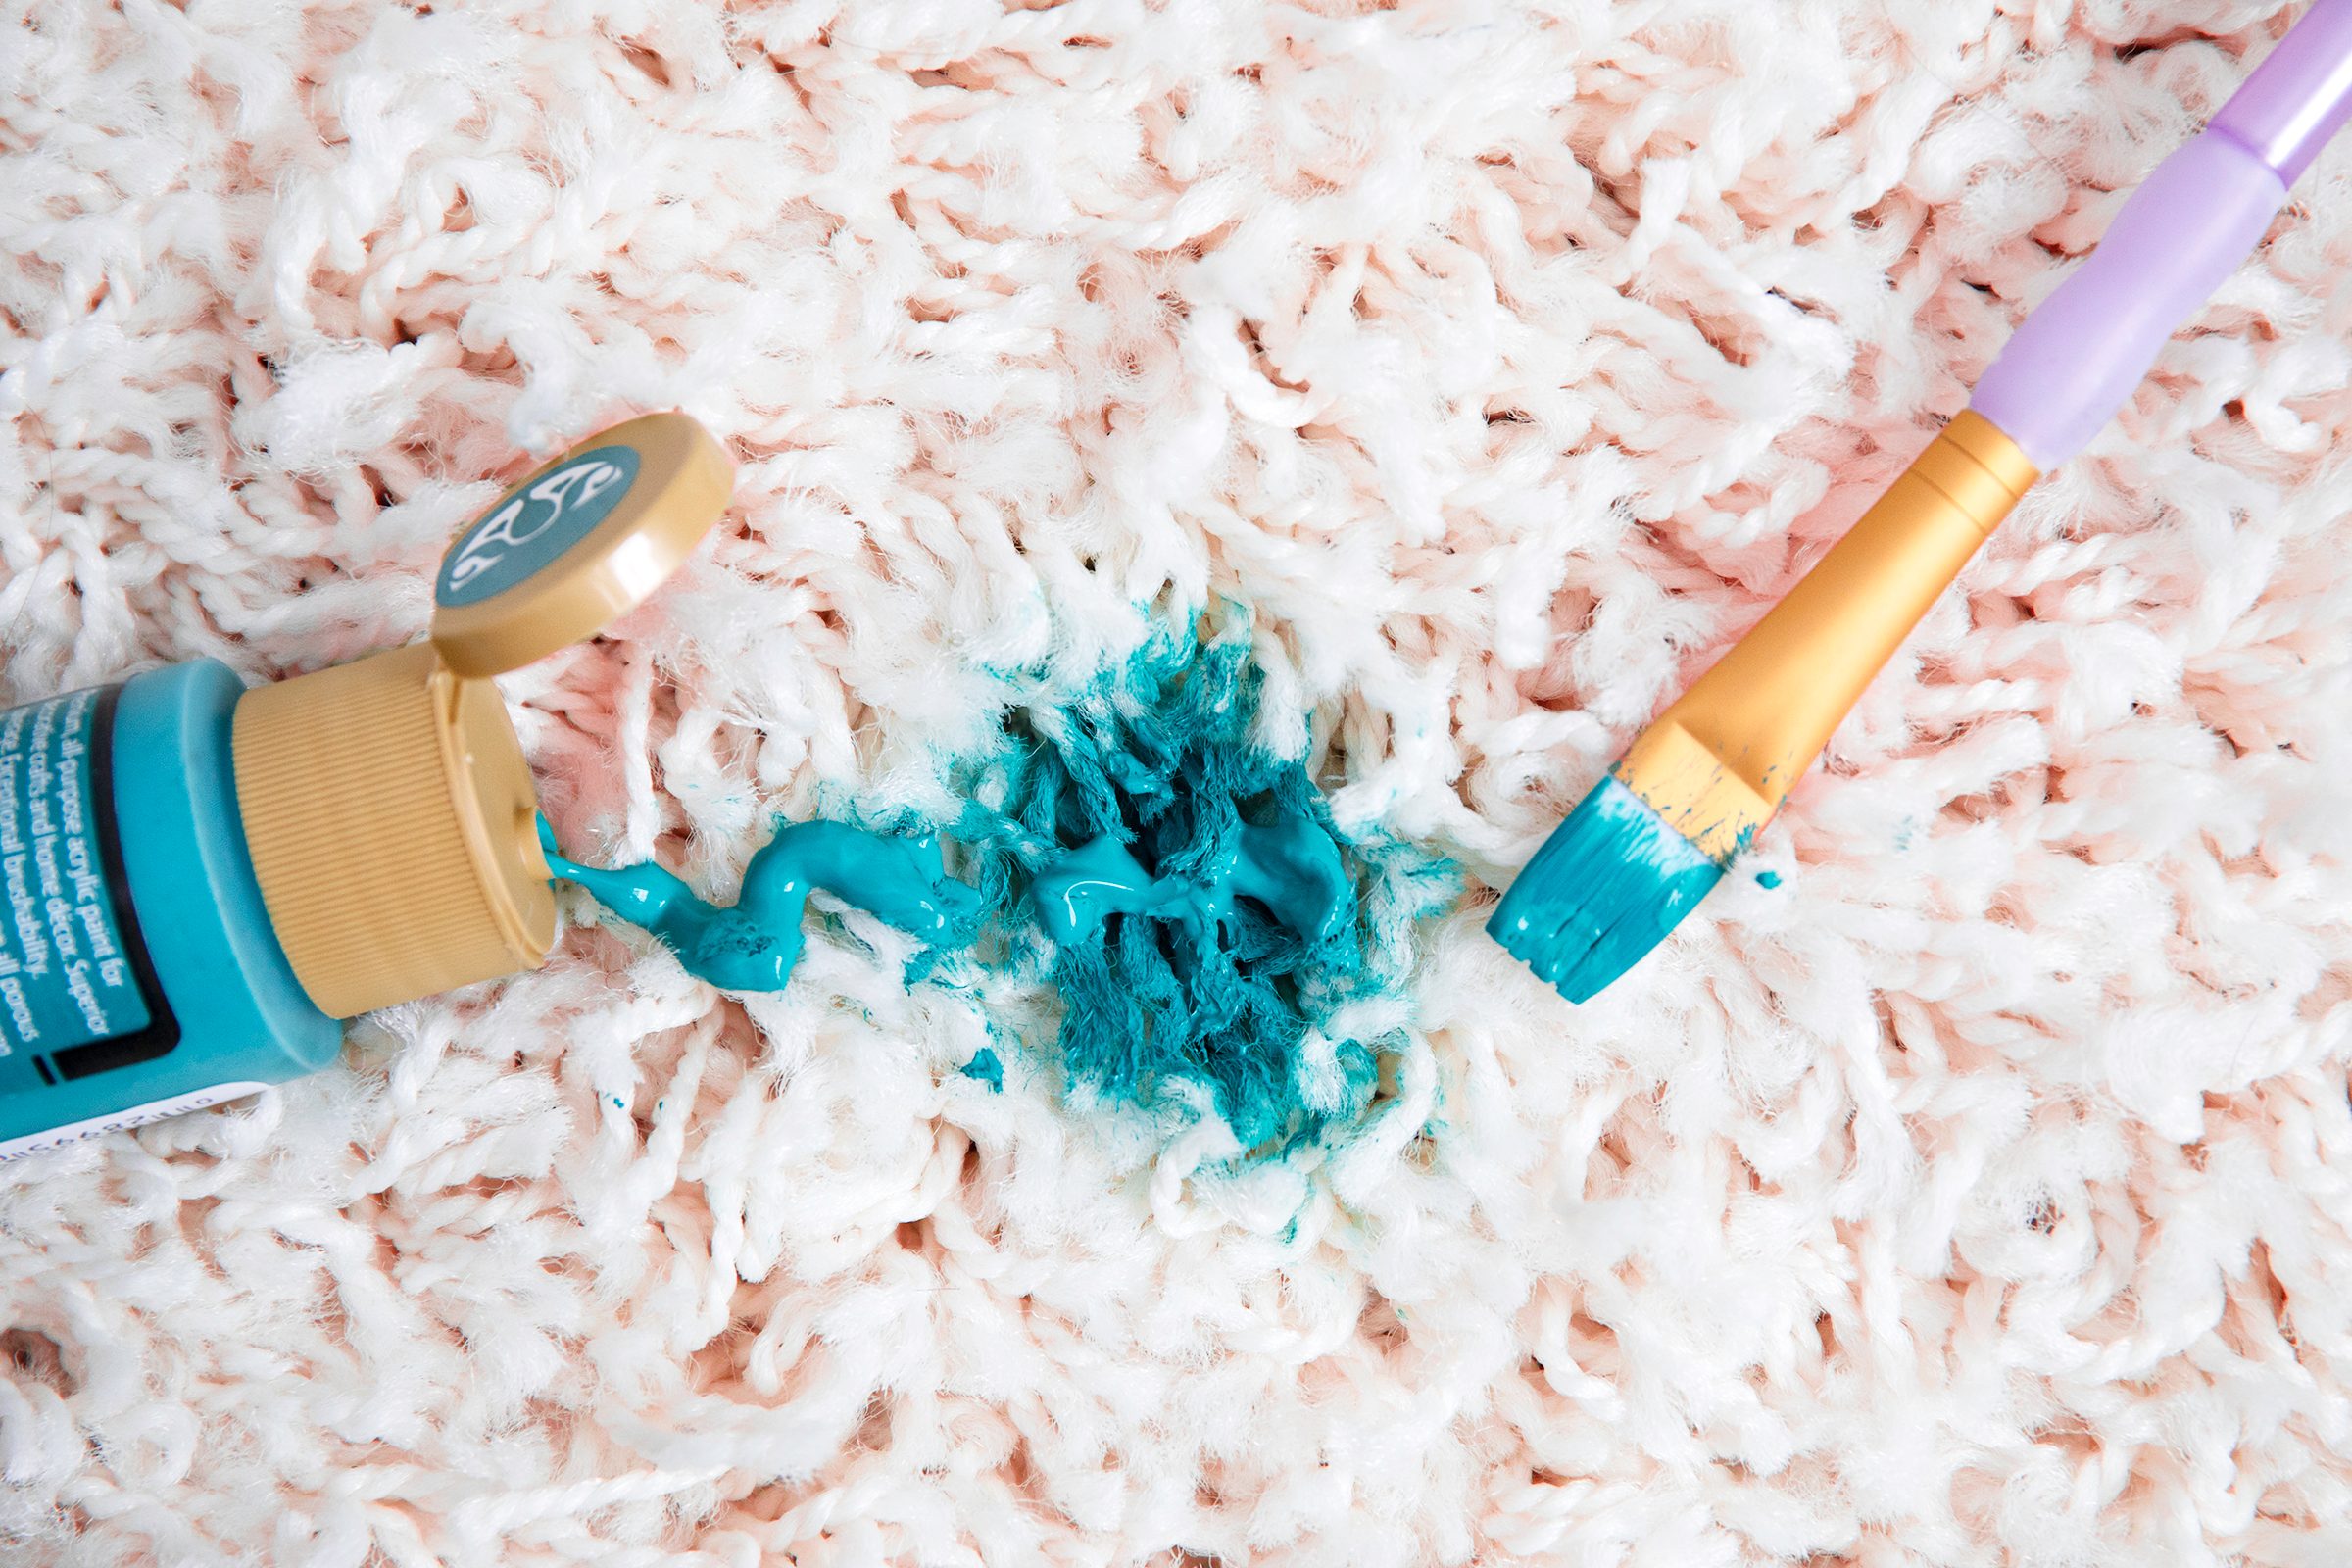 How to Get Paint Out of Carpet — Remove Acrylic, Latex Paint from